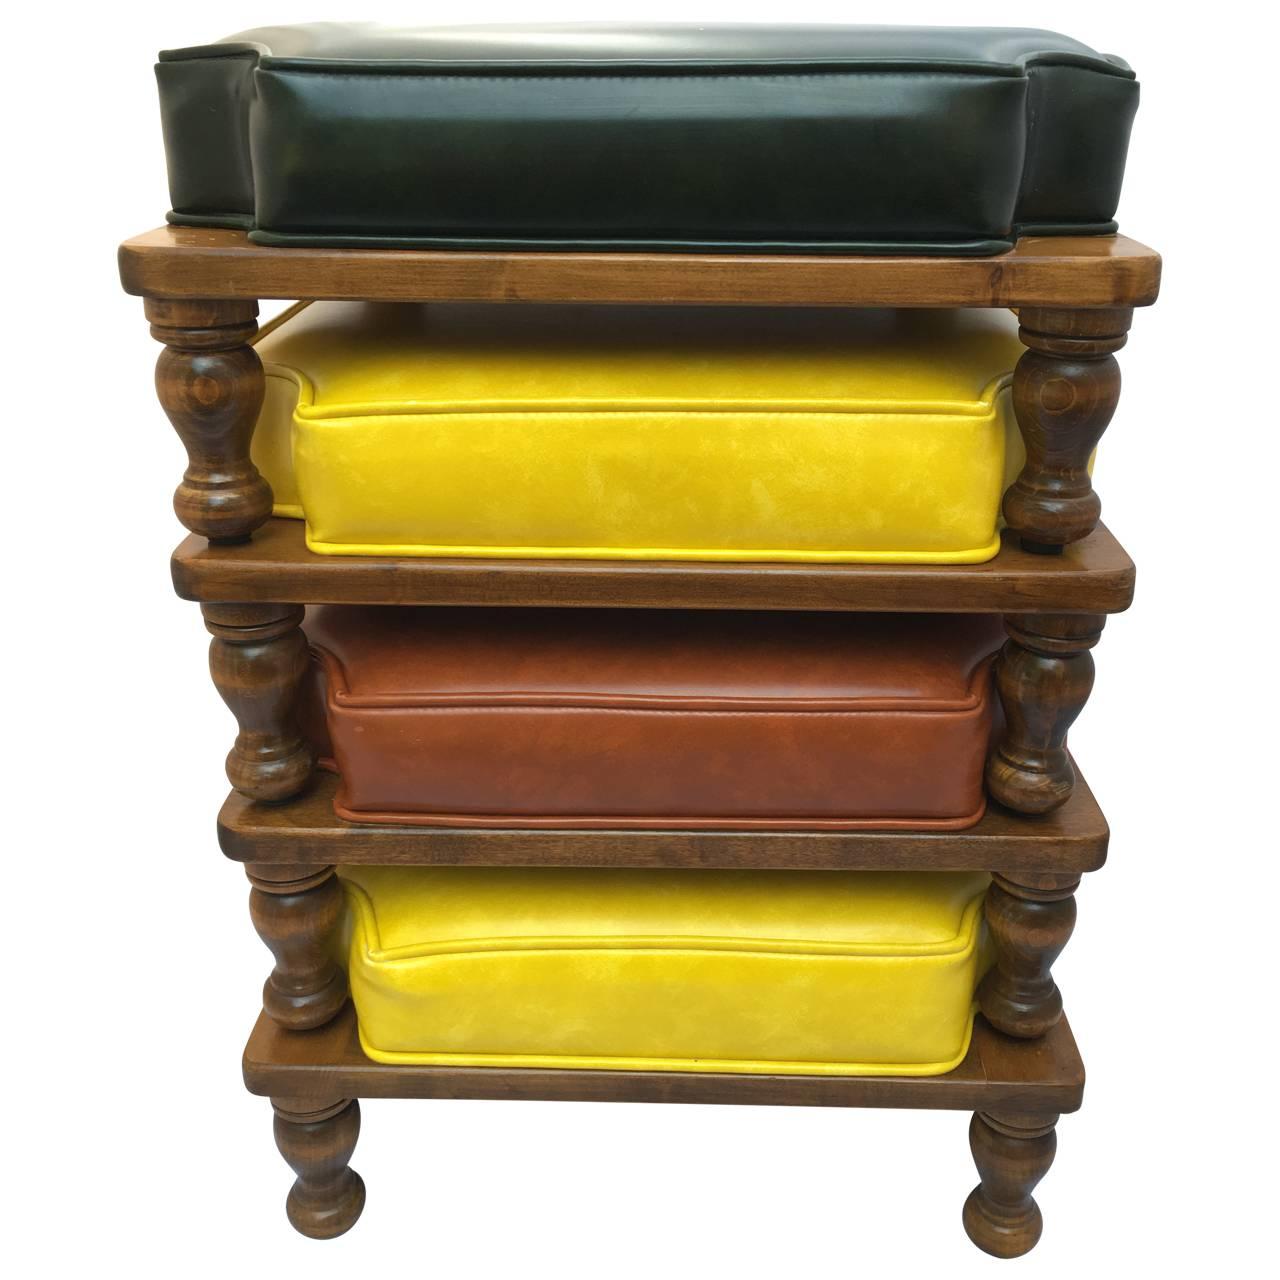 Cool set of four Ethan Allen stacking ottomans from the 1970s. The original Naugahyde cushions are very versatile in black, red and yellow. They sit atop a medium wood finish. 

Total height stacked is 24.5 inches.